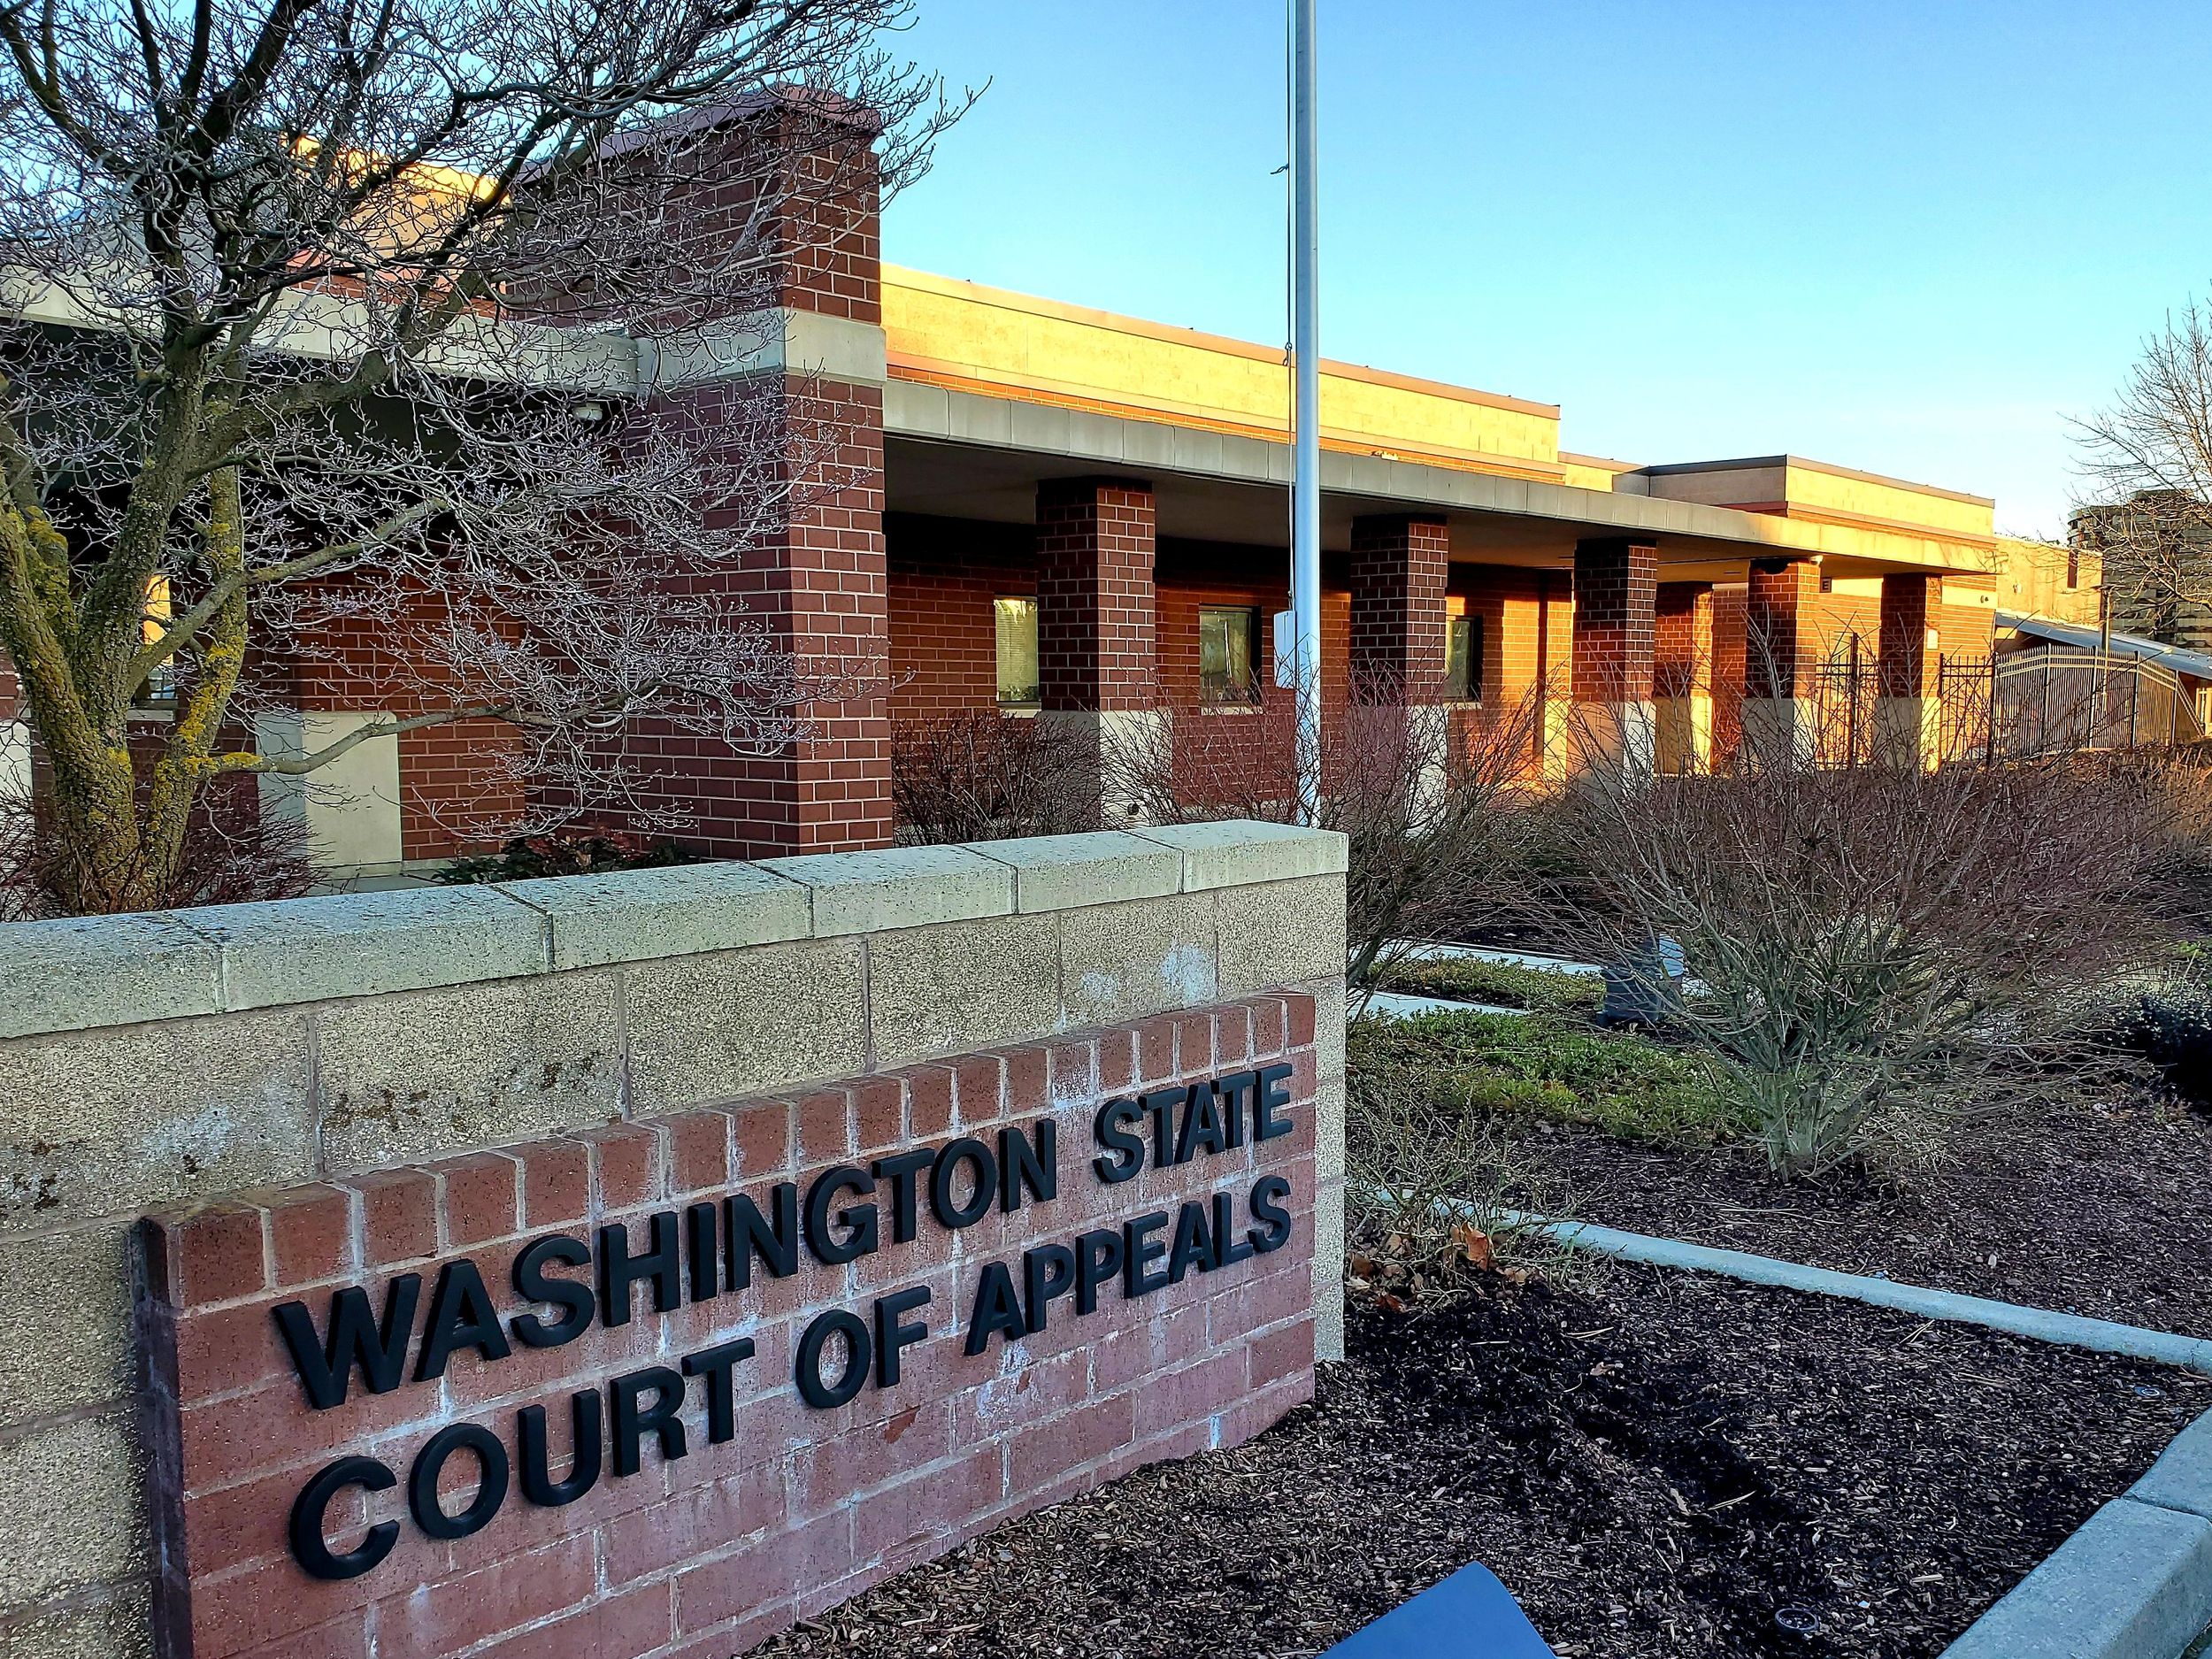 washington state court of appeals